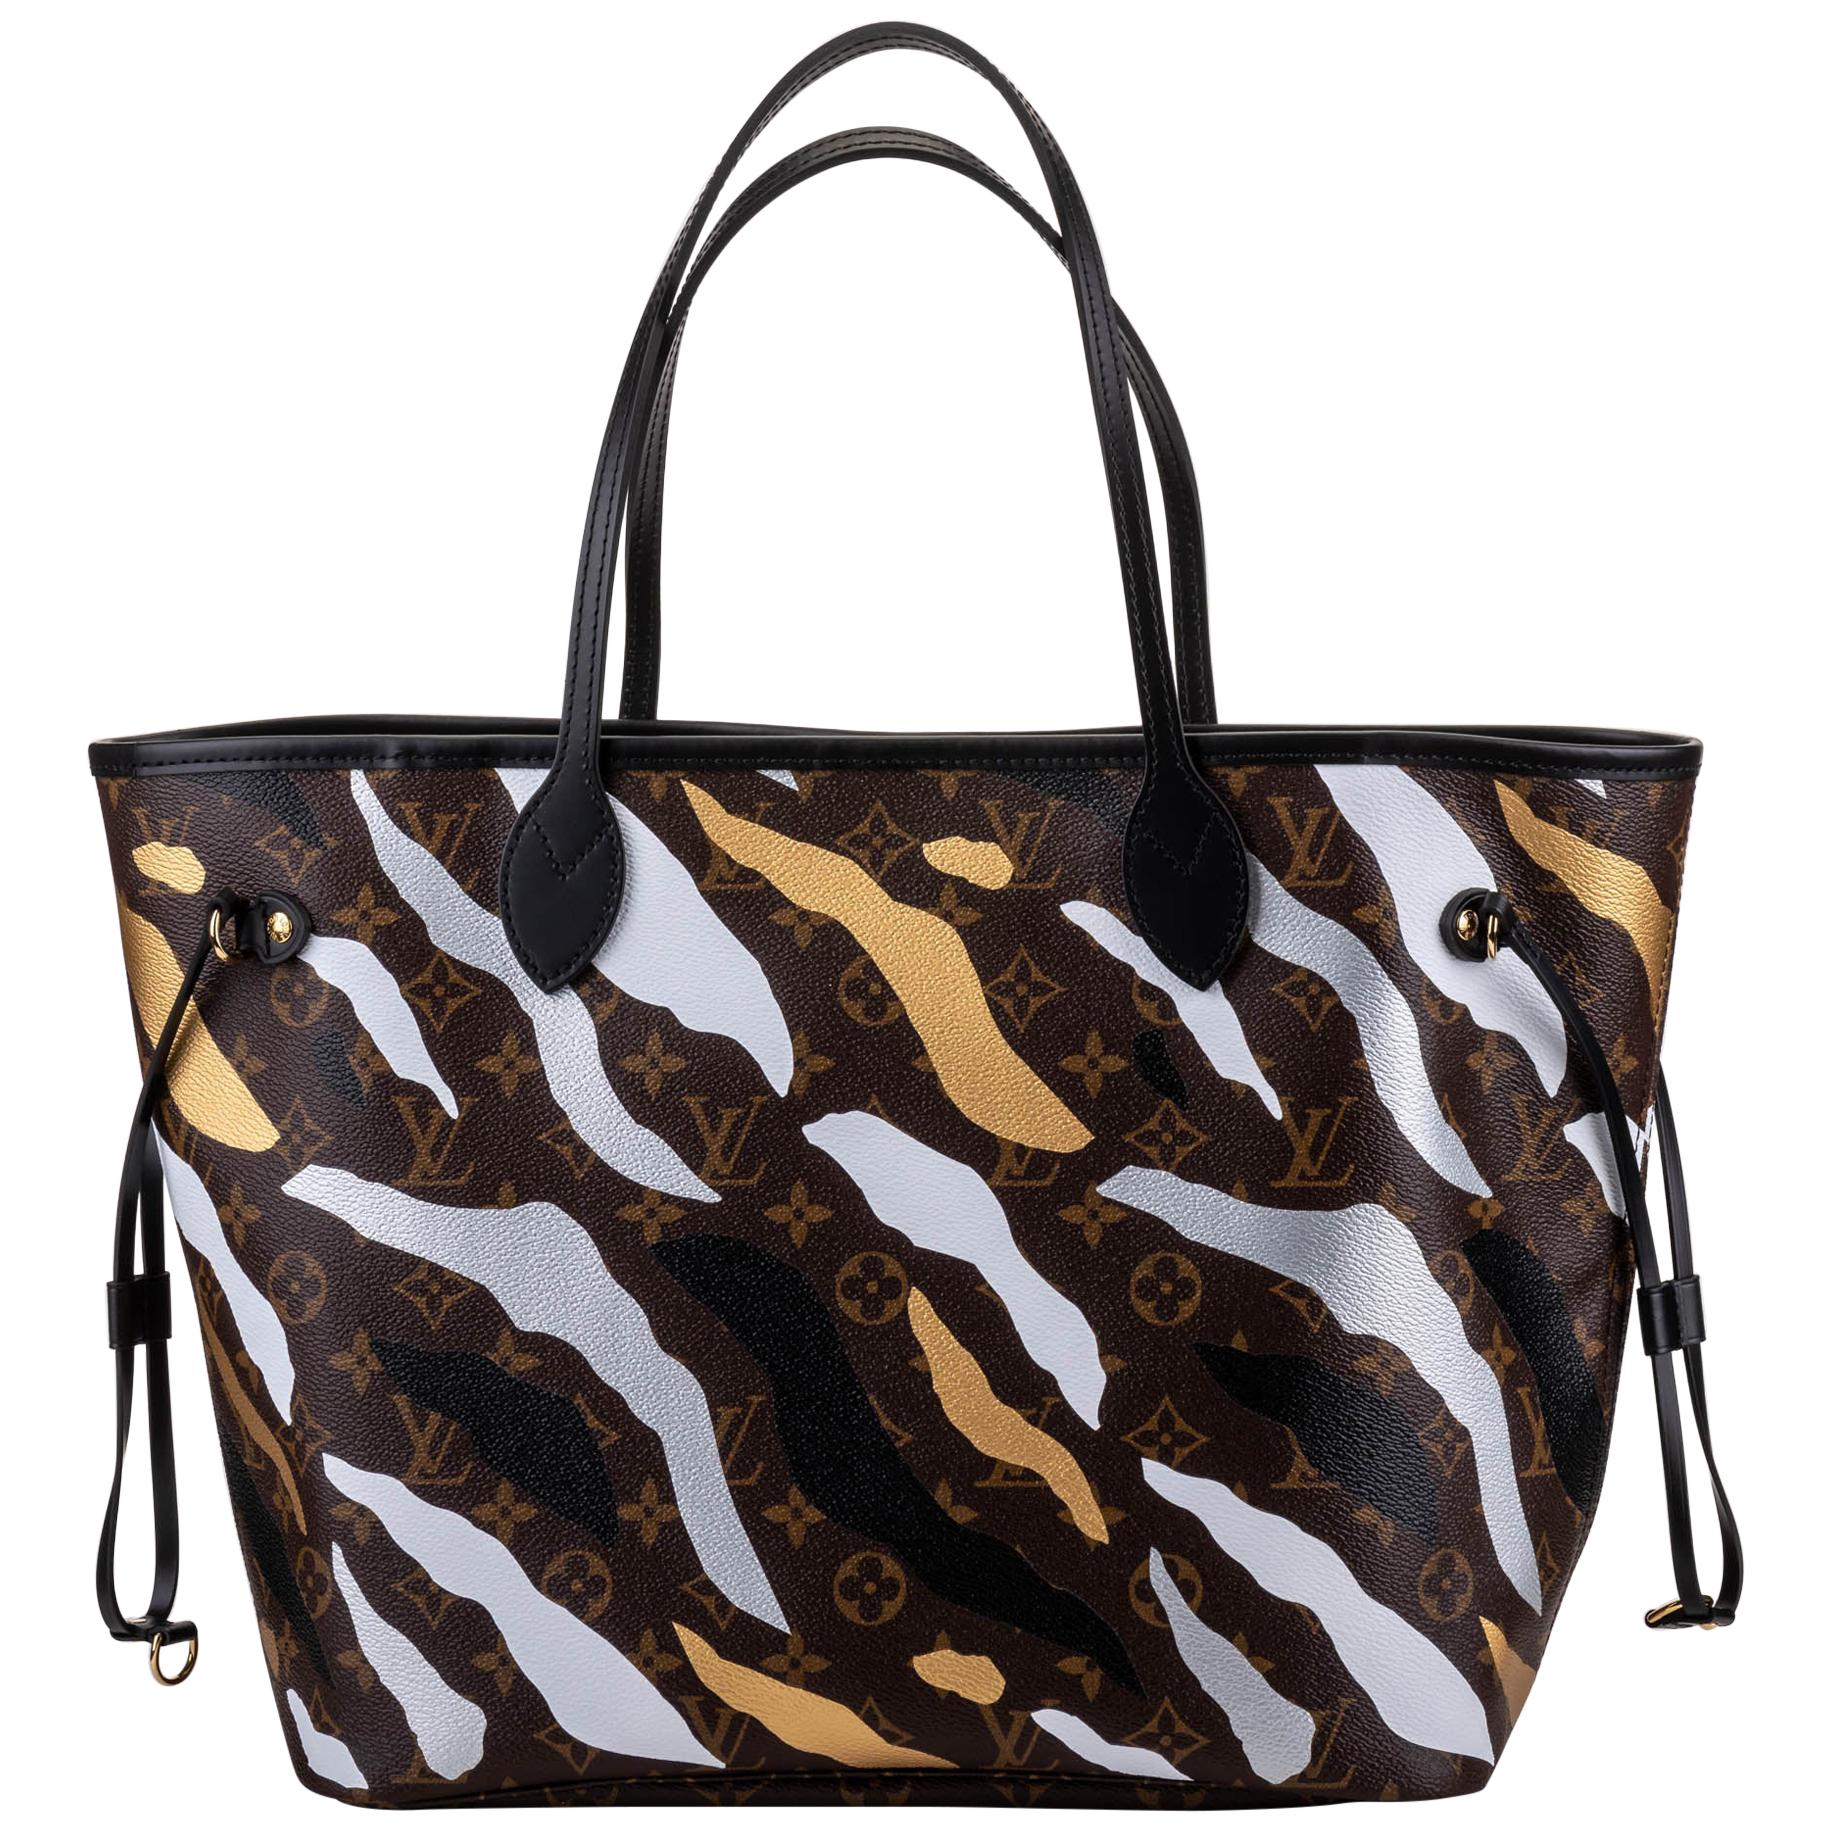 Authenticated used Louis Vuitton Louis Vuitton Monogram Camouflage Neverfull mm Tote Bag Lol Collaboration Limited M45201, Adult Unisex, Size: (Hxwxd)